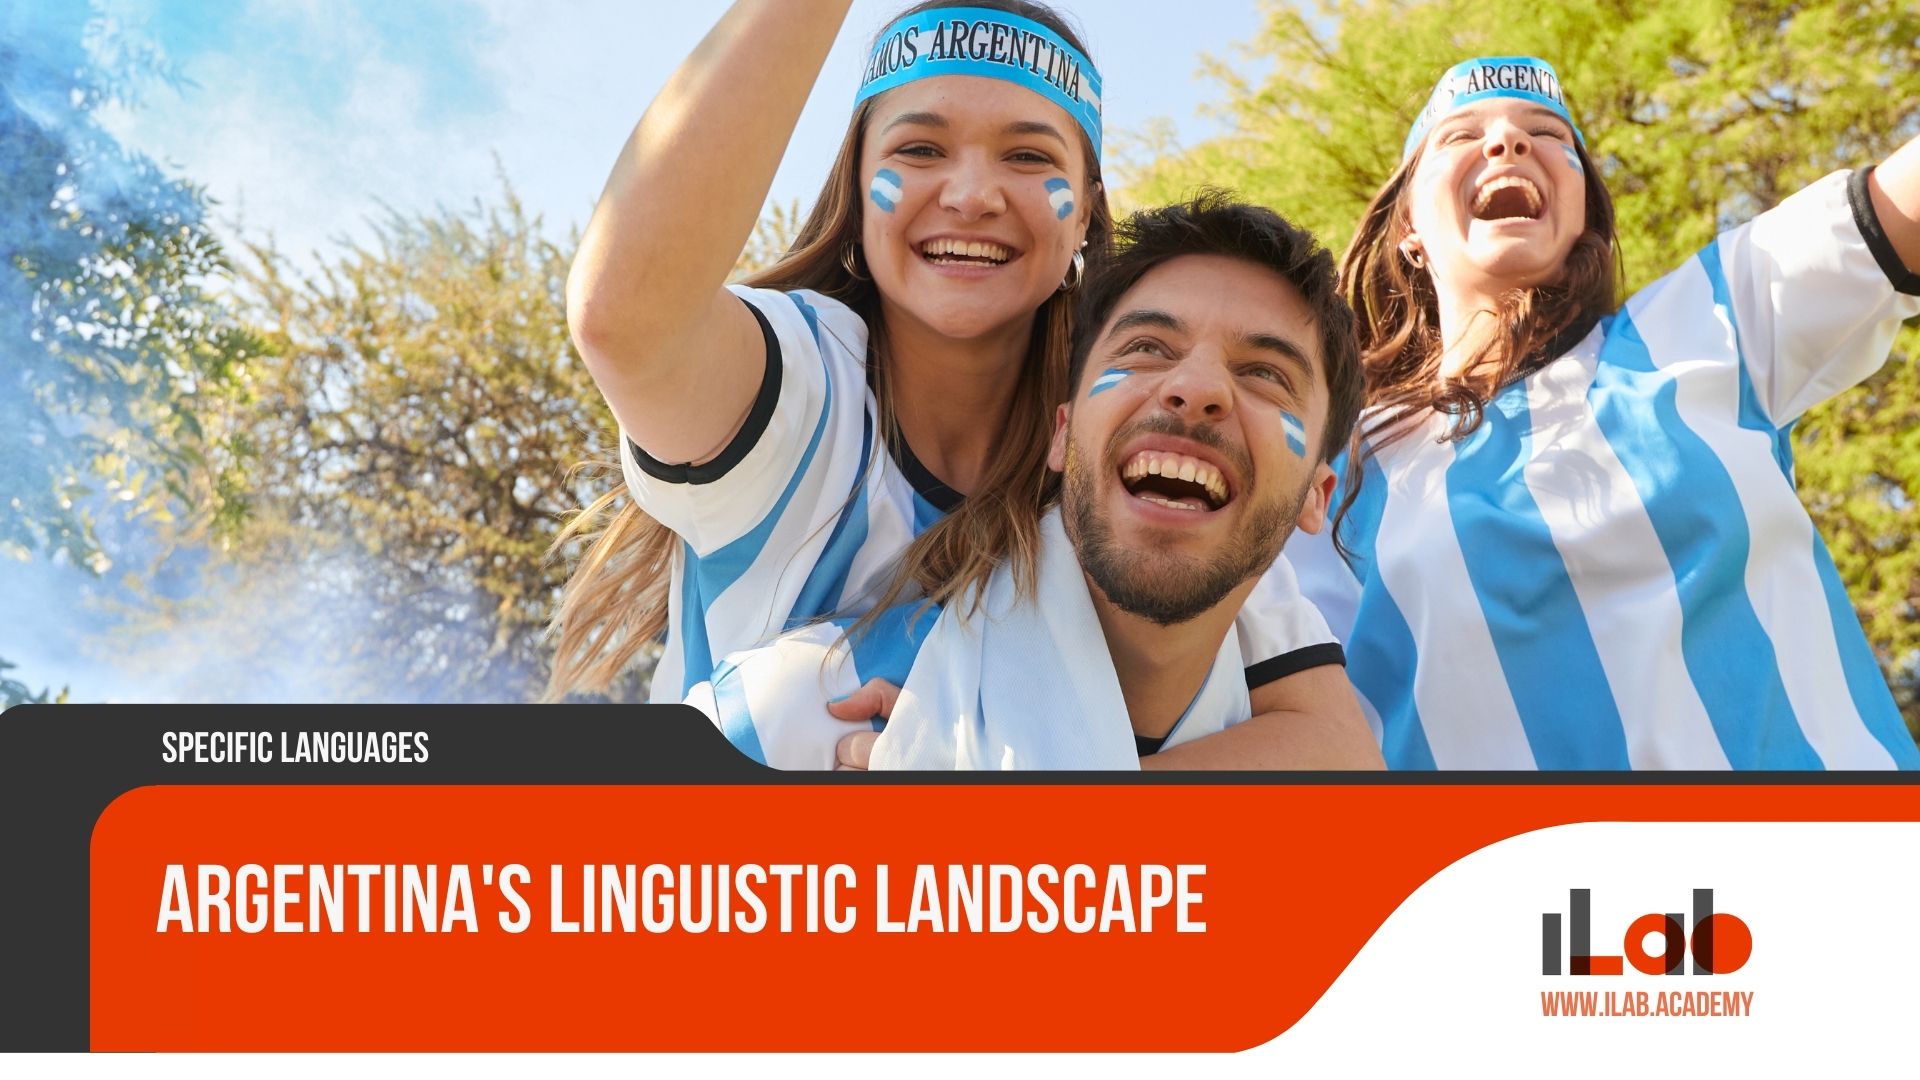 Argentina's Linguistic Landscape: a Window Into Spanish Variations